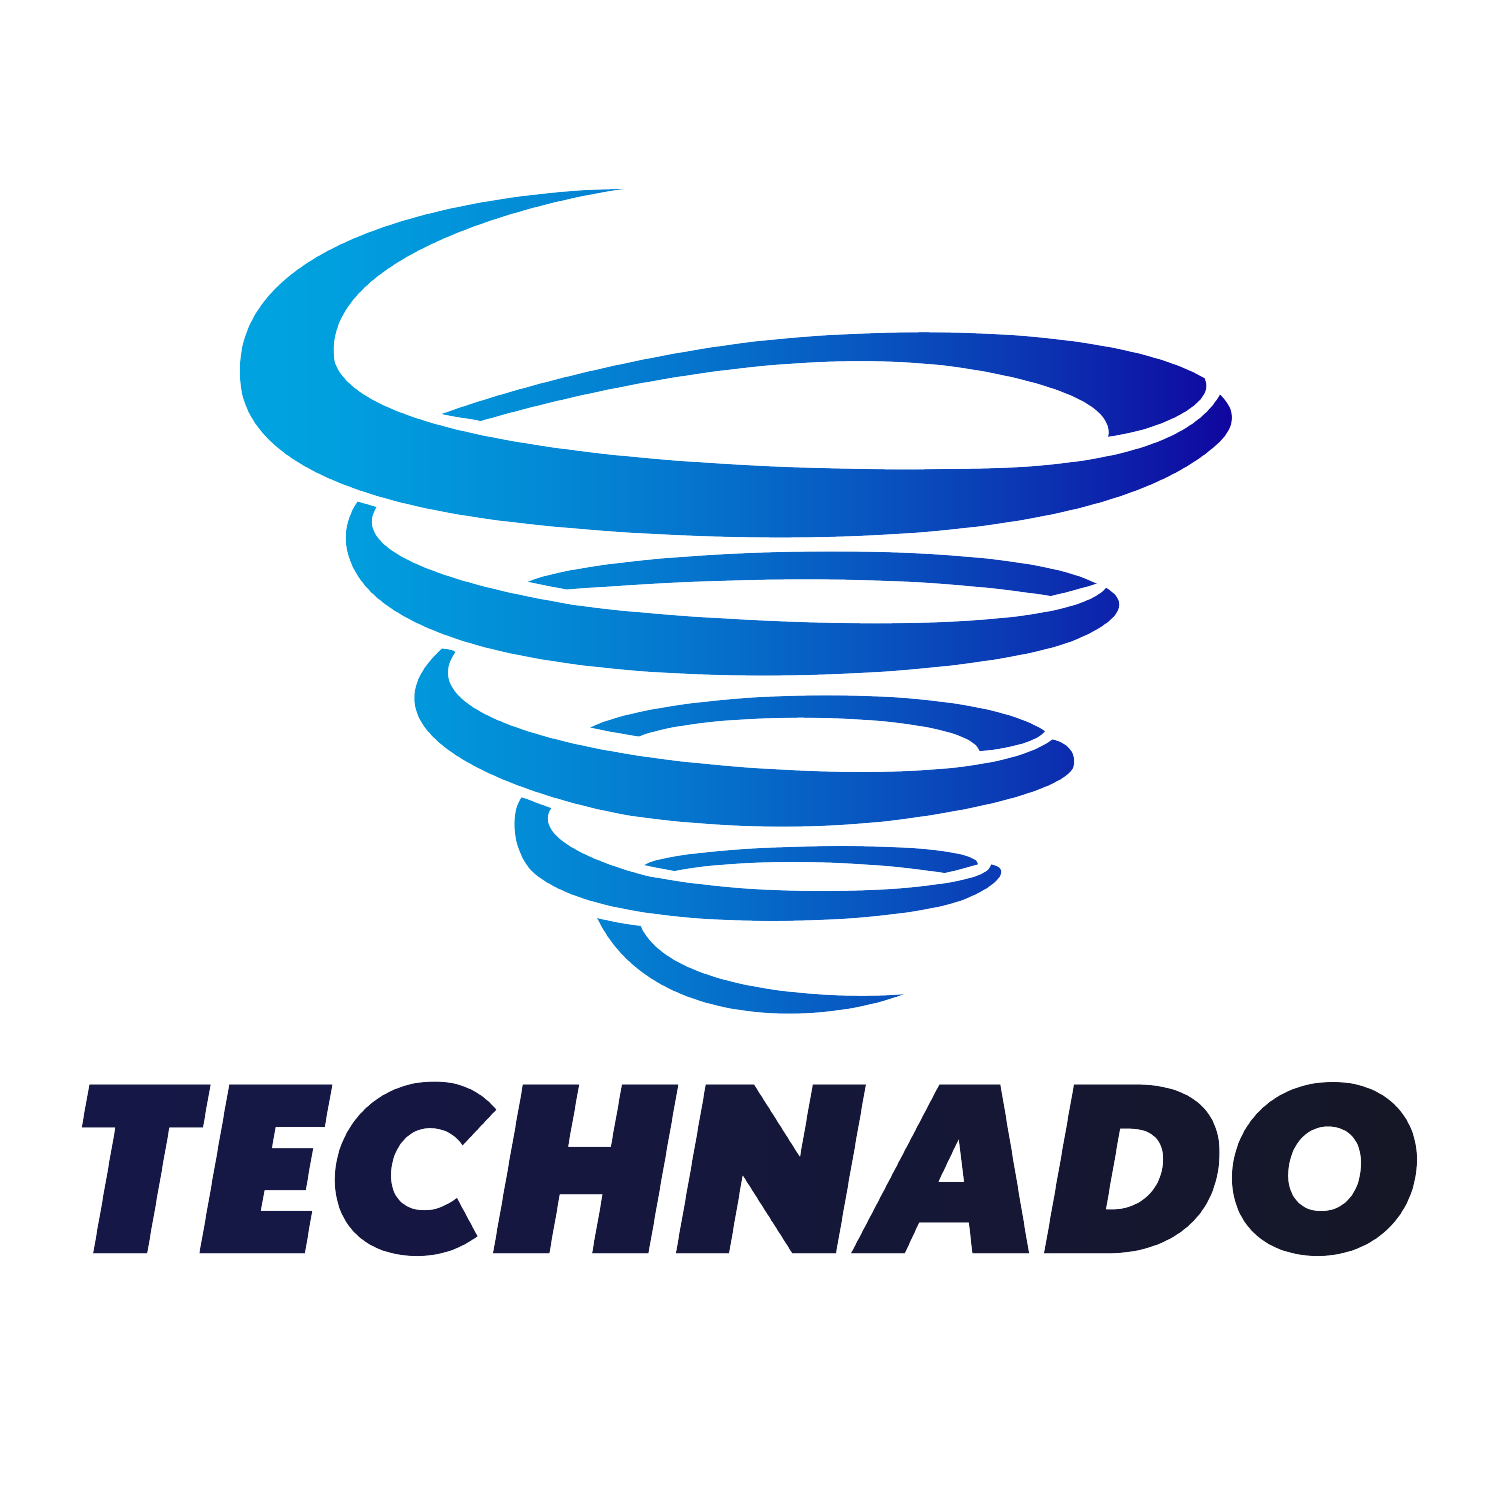 Technado, Ep. 251: What’s up with Atlassian?